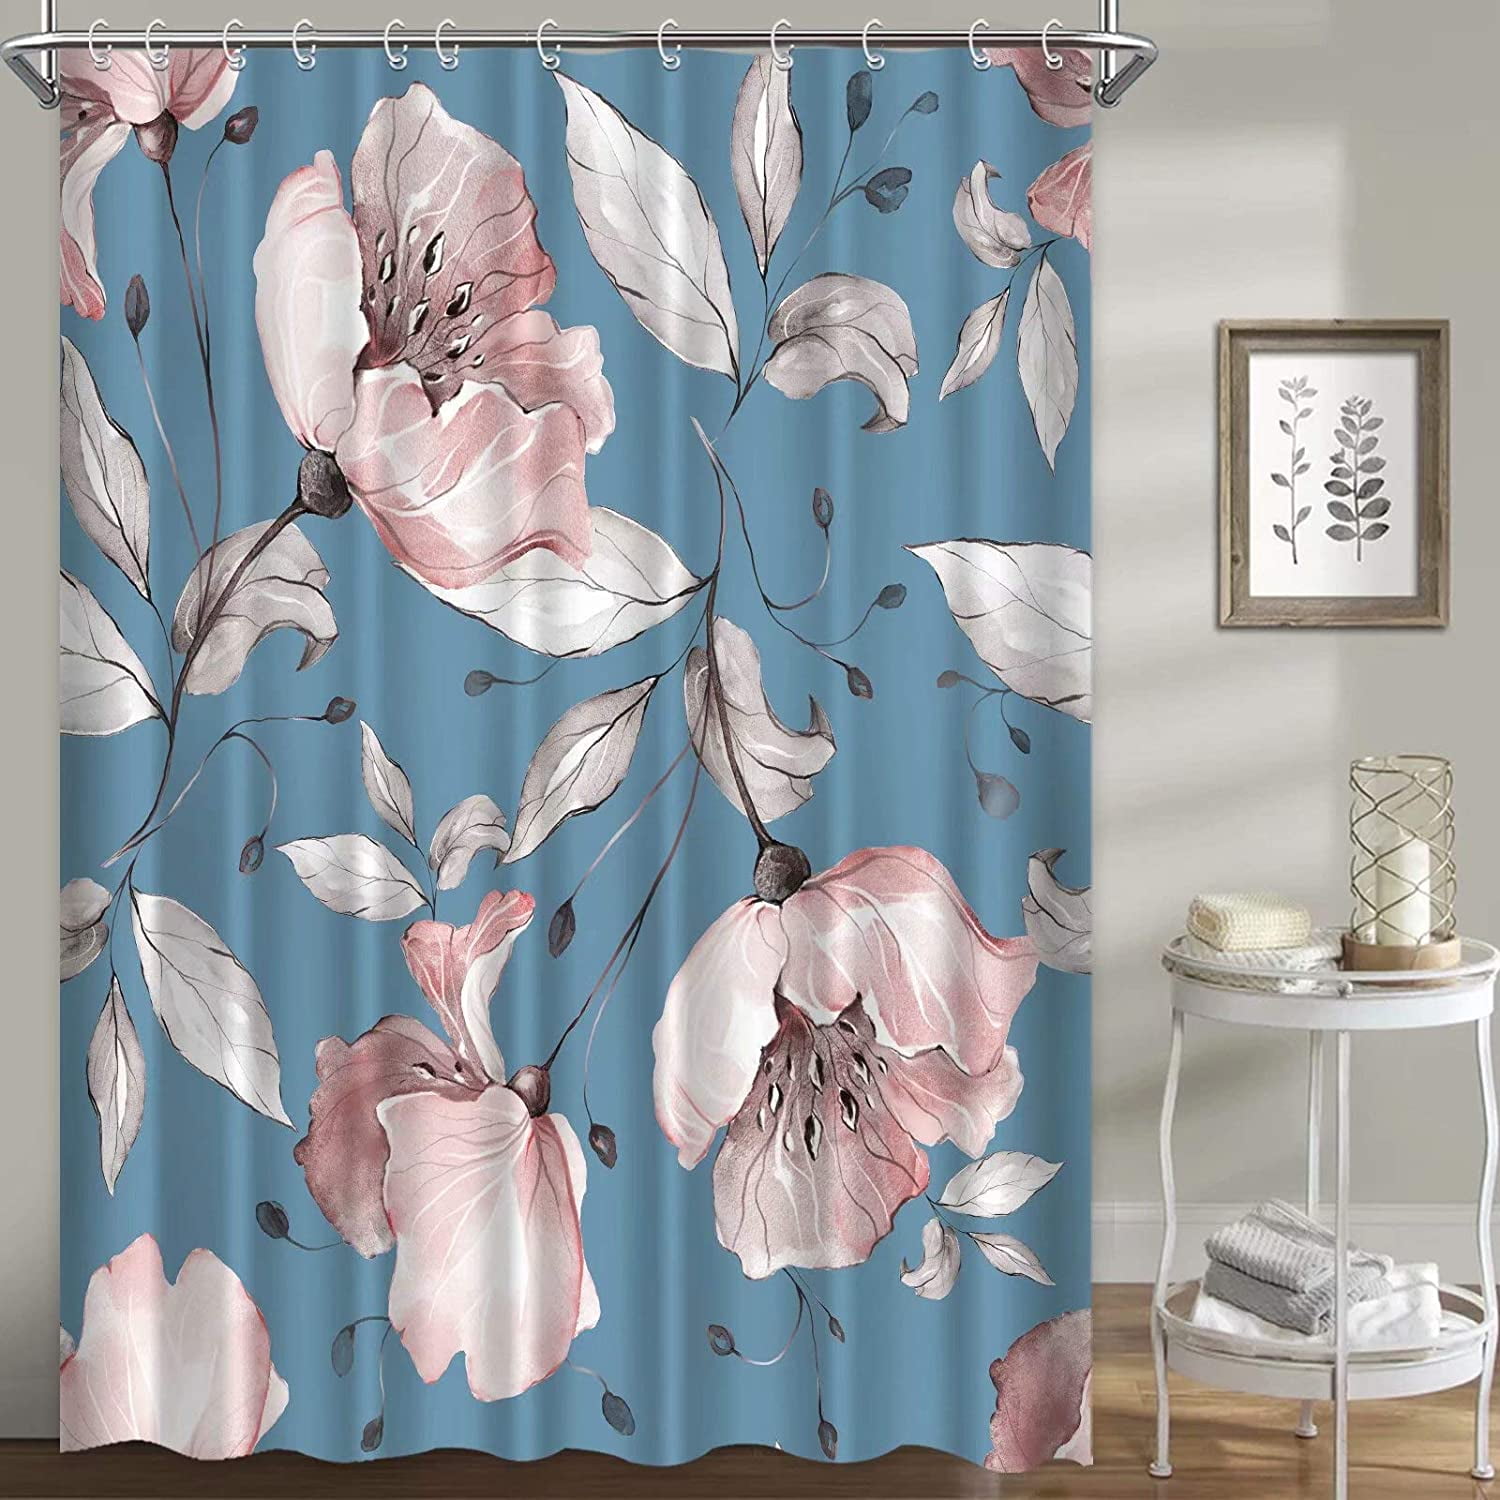 Details about   Waterproof Bathroom Cover Curtains Floral Designs Eco-Friendly Polyester Curtain 